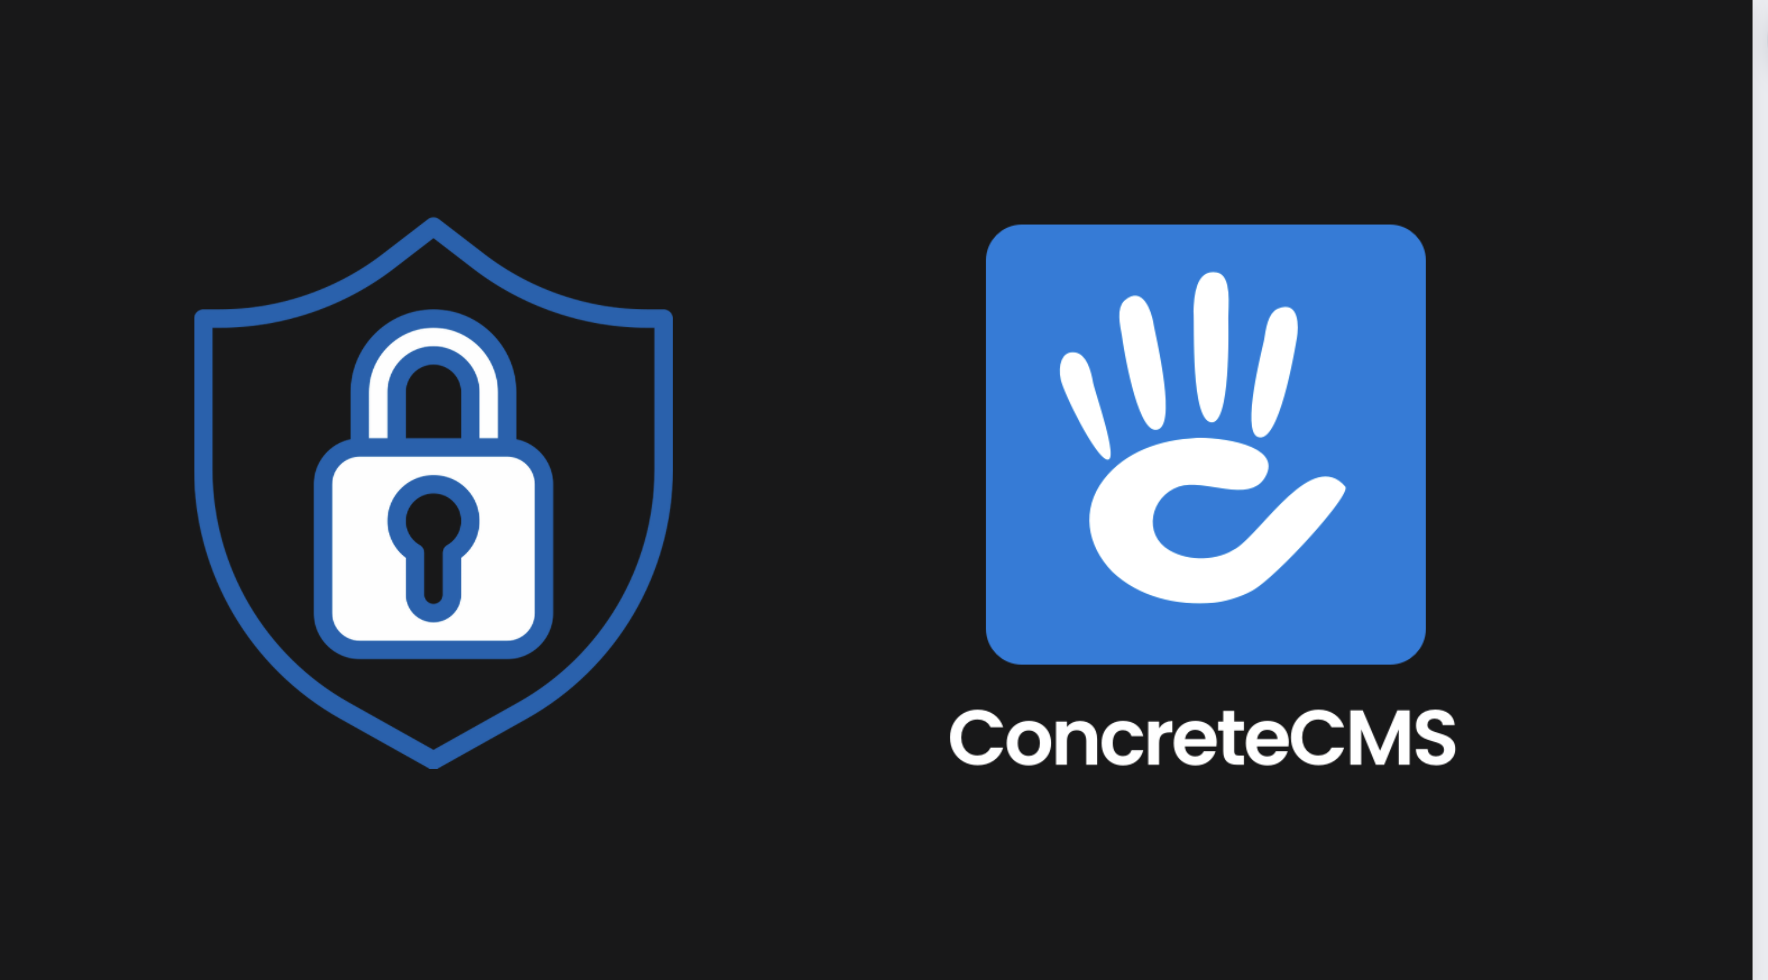 Security Announcement with Concrete CMS logo